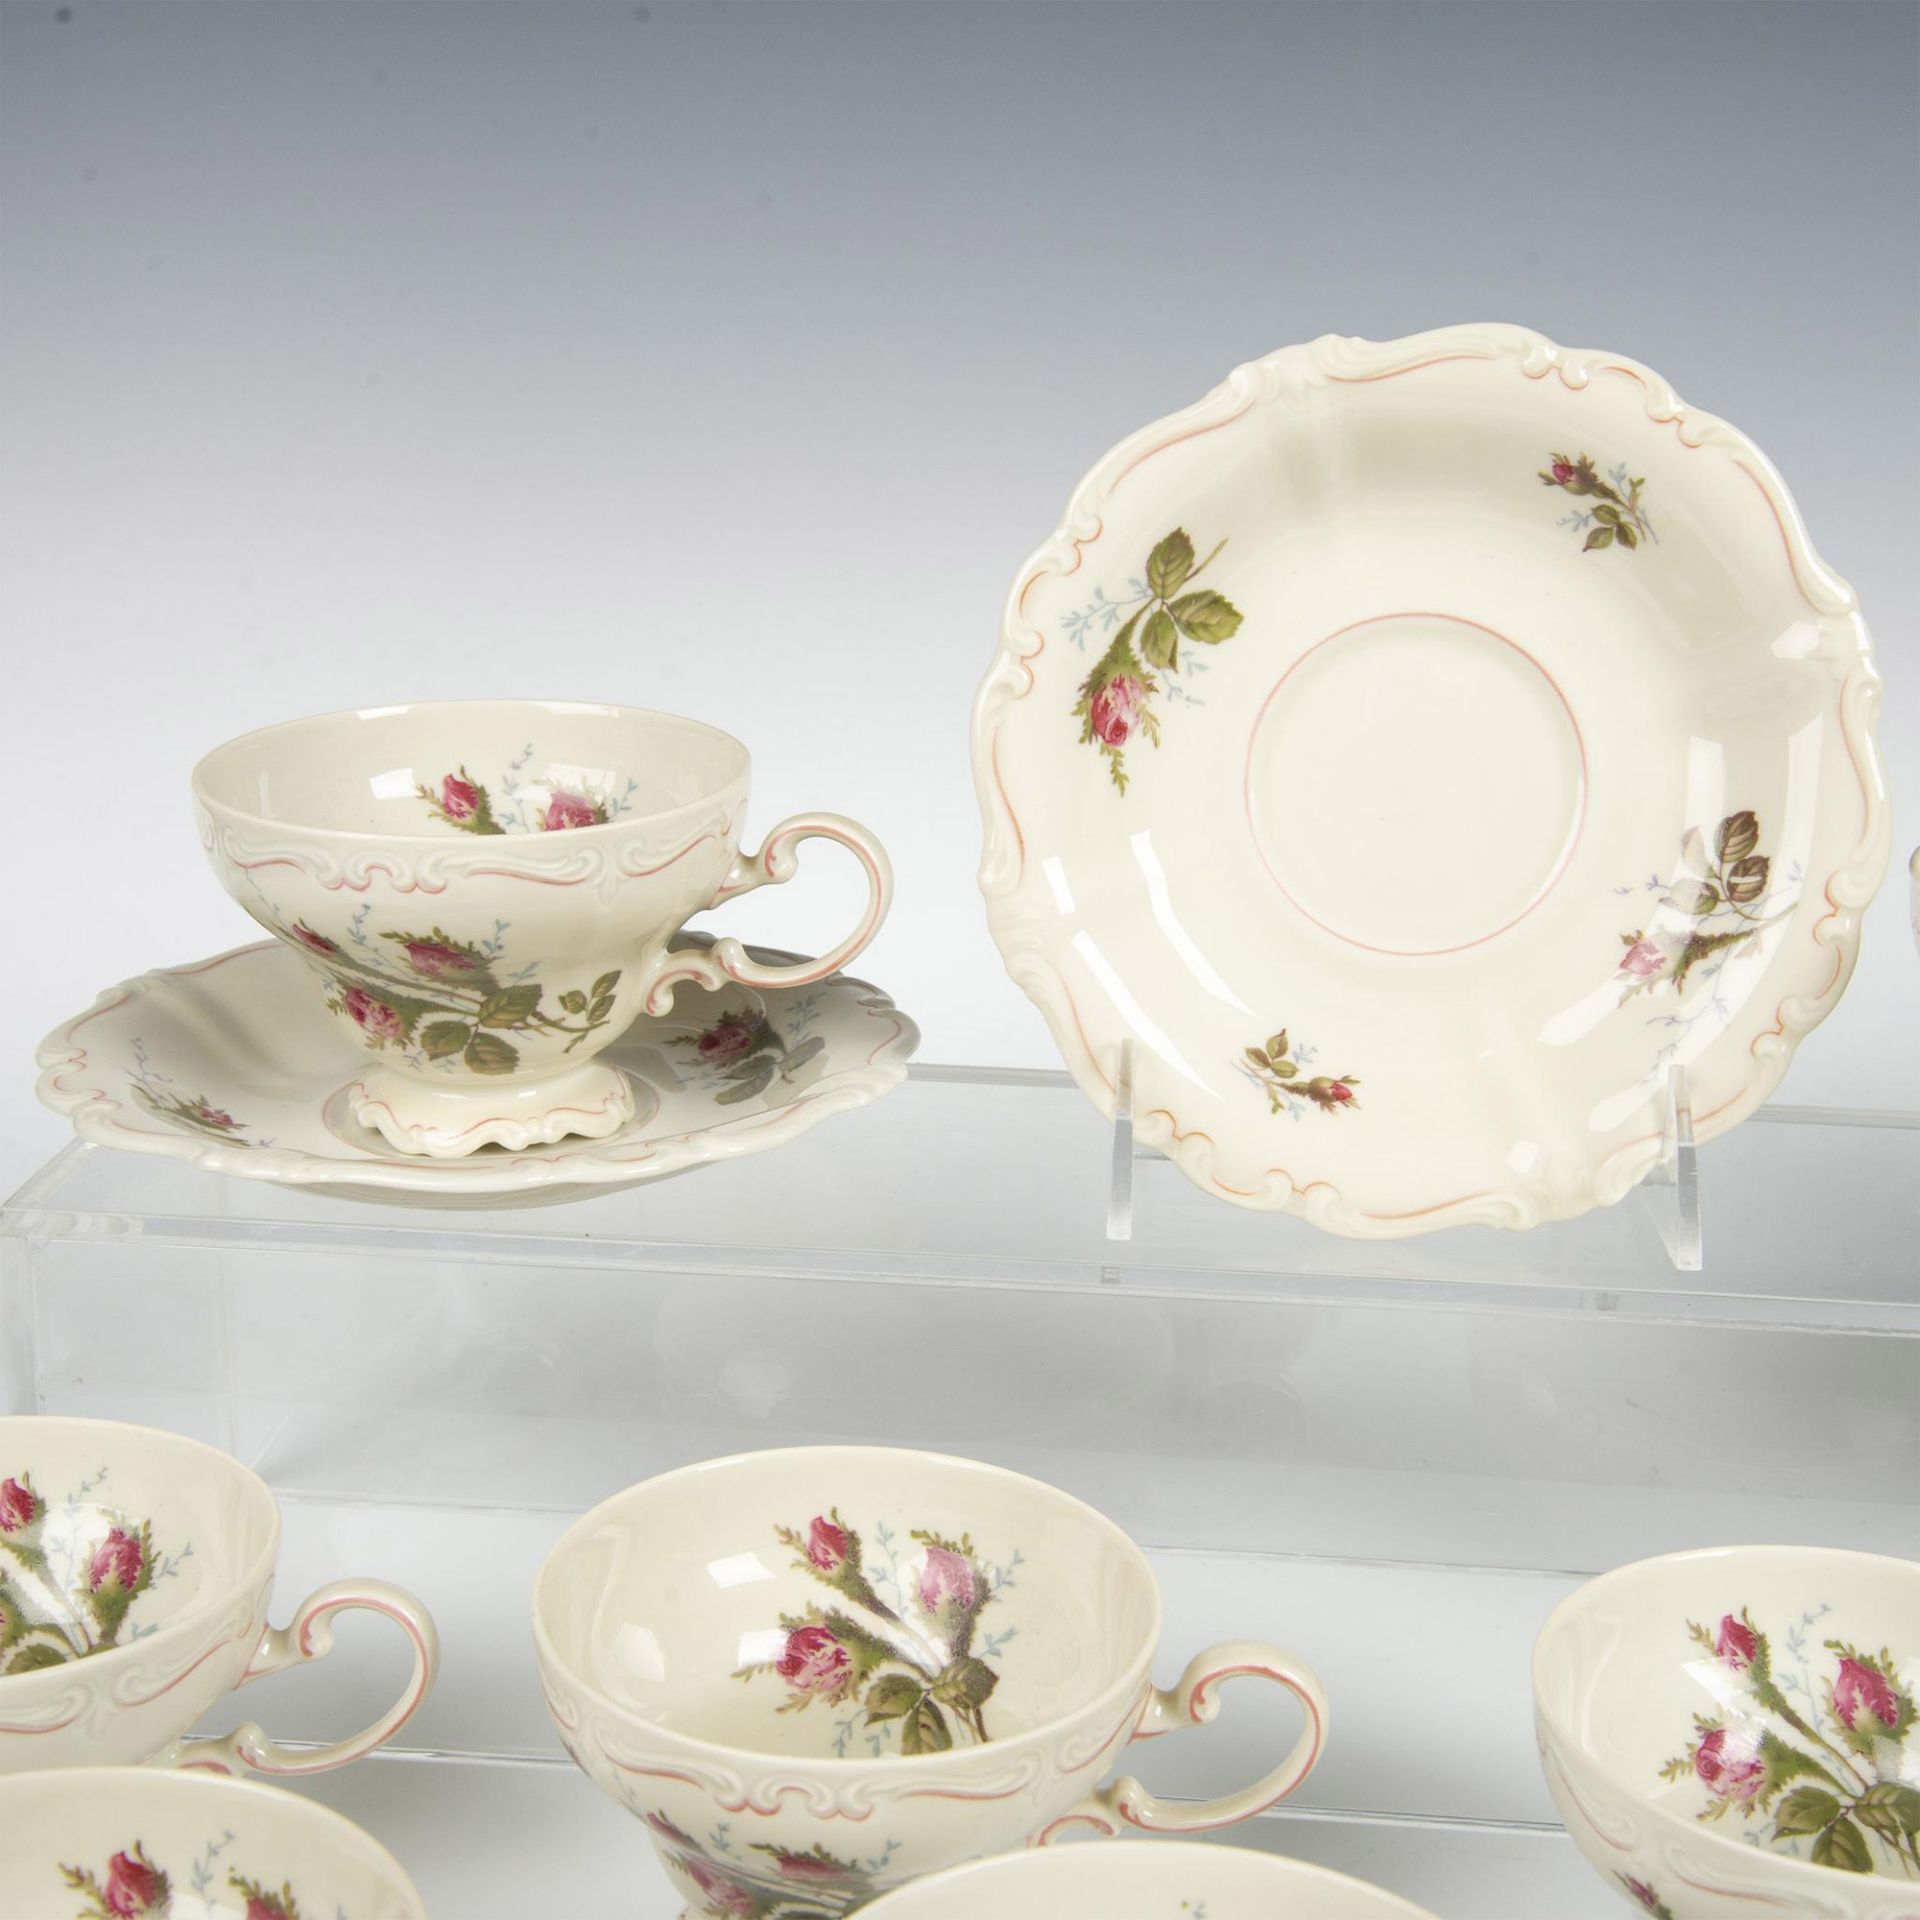 24pc Rosenthal Pompadour Moss Rose Teacups and Saucers - Image 3 of 4